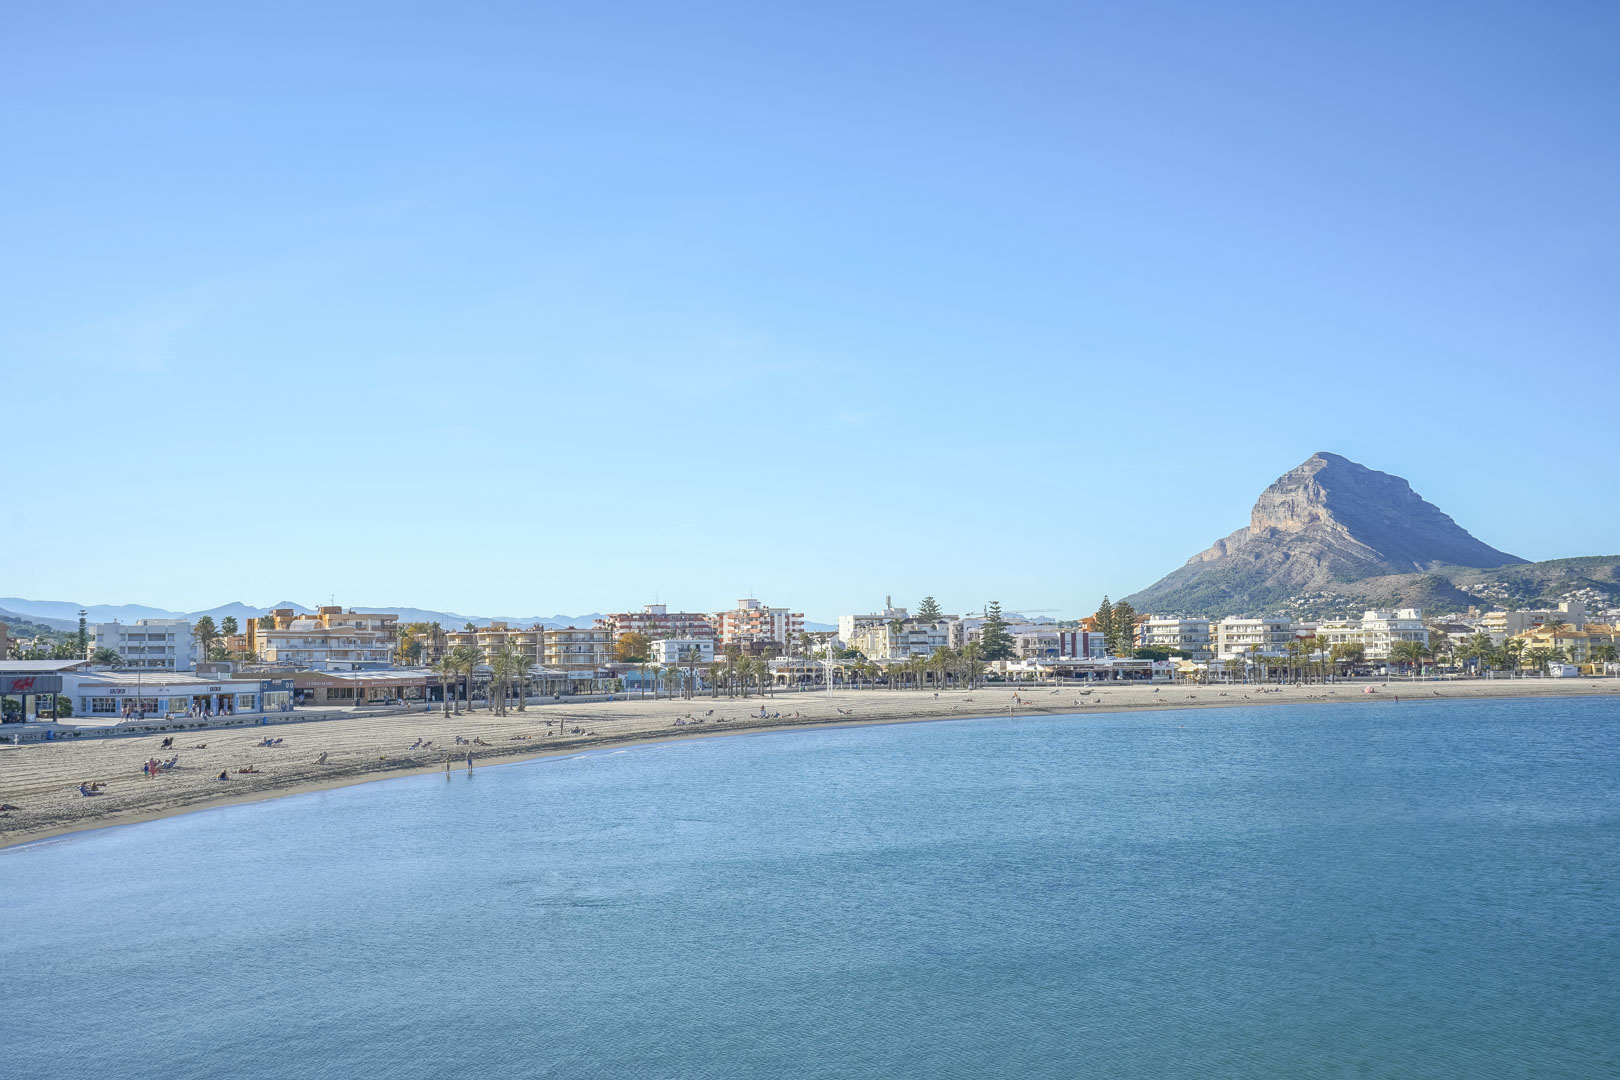 Fully renovated 3-bedroom apartment for sale in Javea just a few meters from the beach